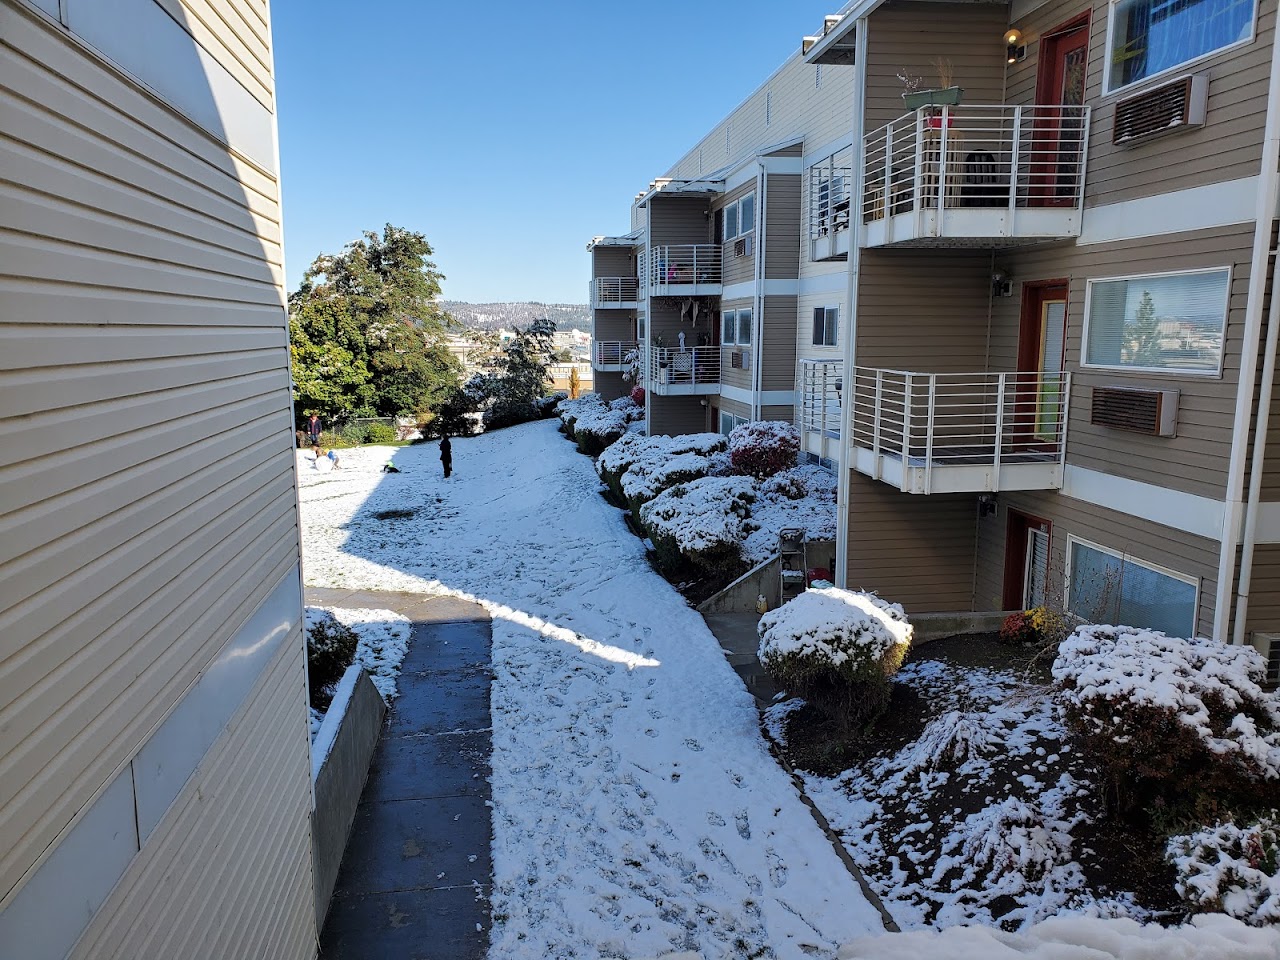 Photo of CATHERINE JOHNSON COURT. Affordable housing located at 6321 E. 4TH AVENUE SPOKANE VALLEY, WA 99212